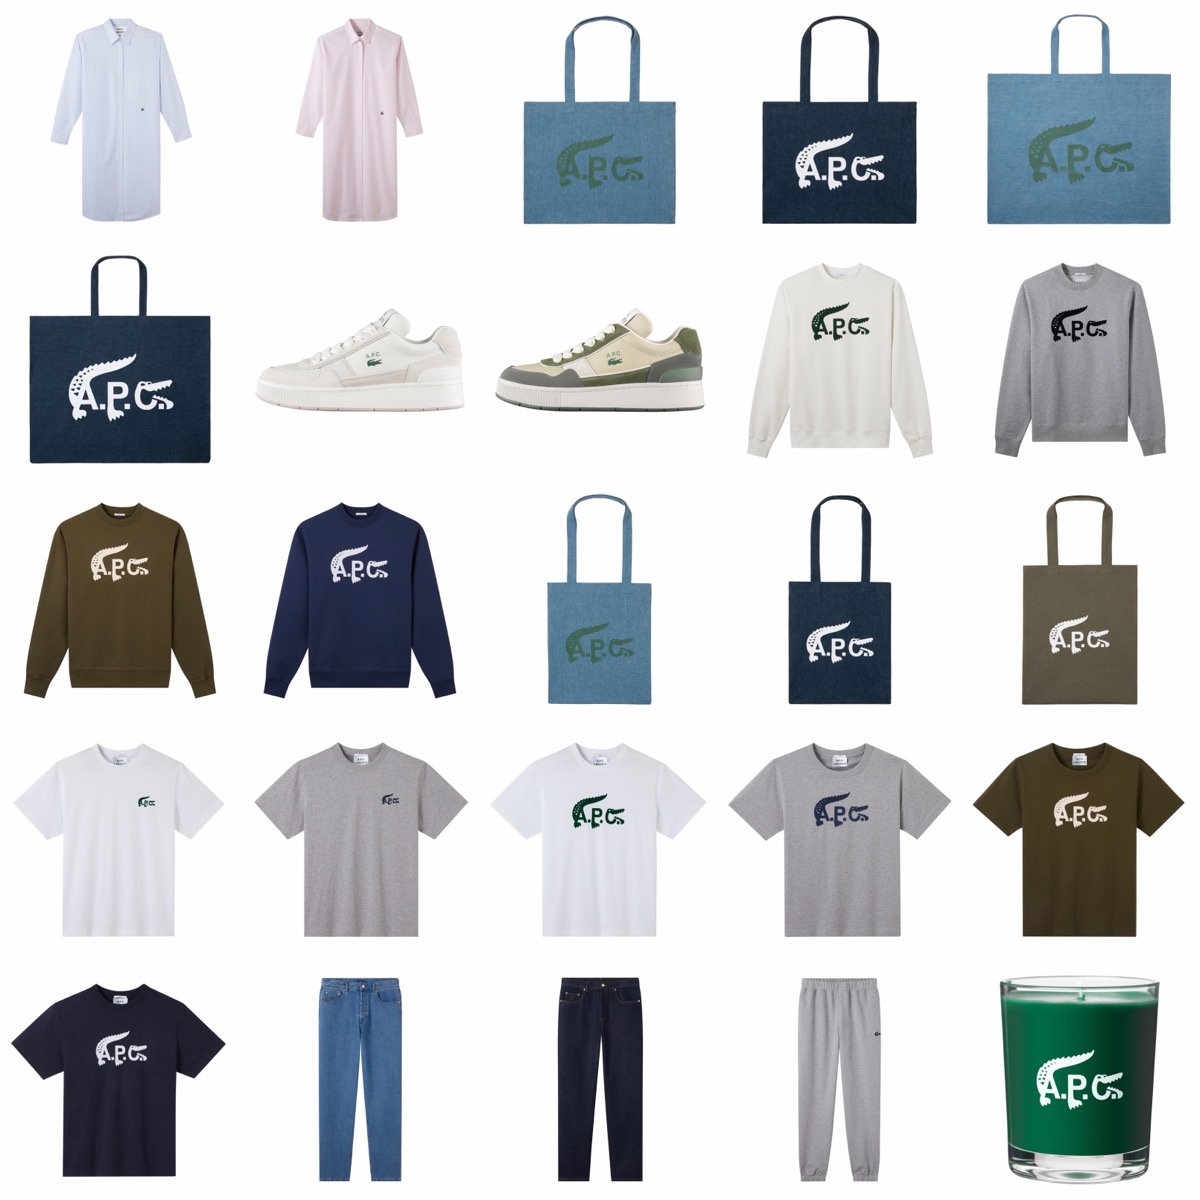 A.P.C. LACOSTE INTERACTION #14』が国内6月8日より発売予定 | UP TO DATE